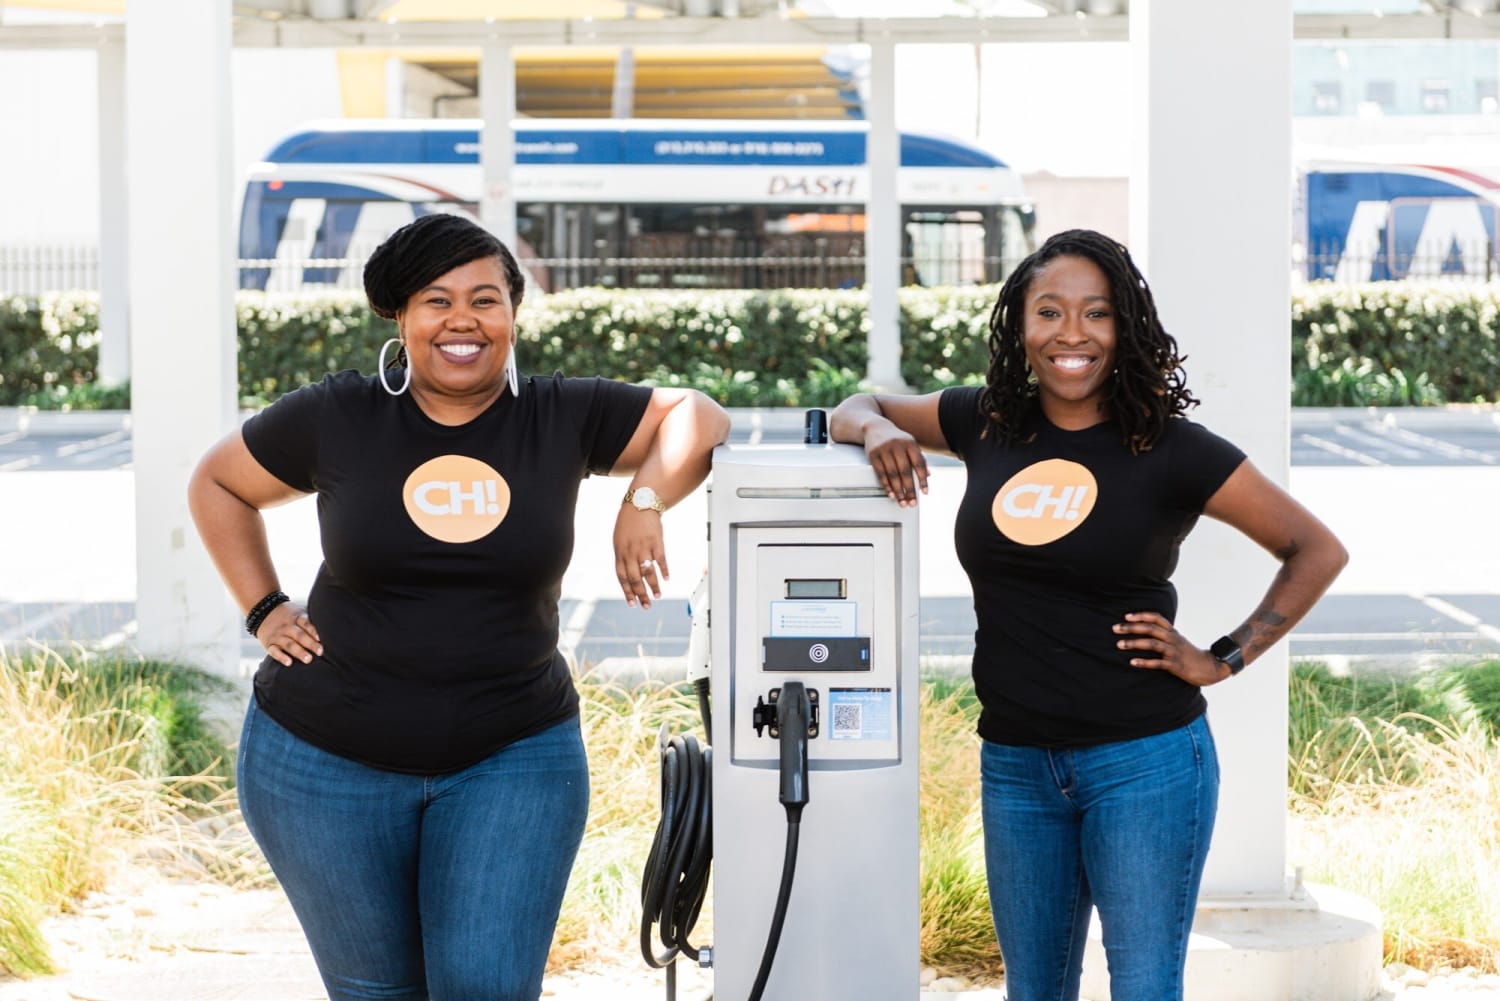 ChargerHelp raises $2.8 million to repair EV chargers with good green jobs